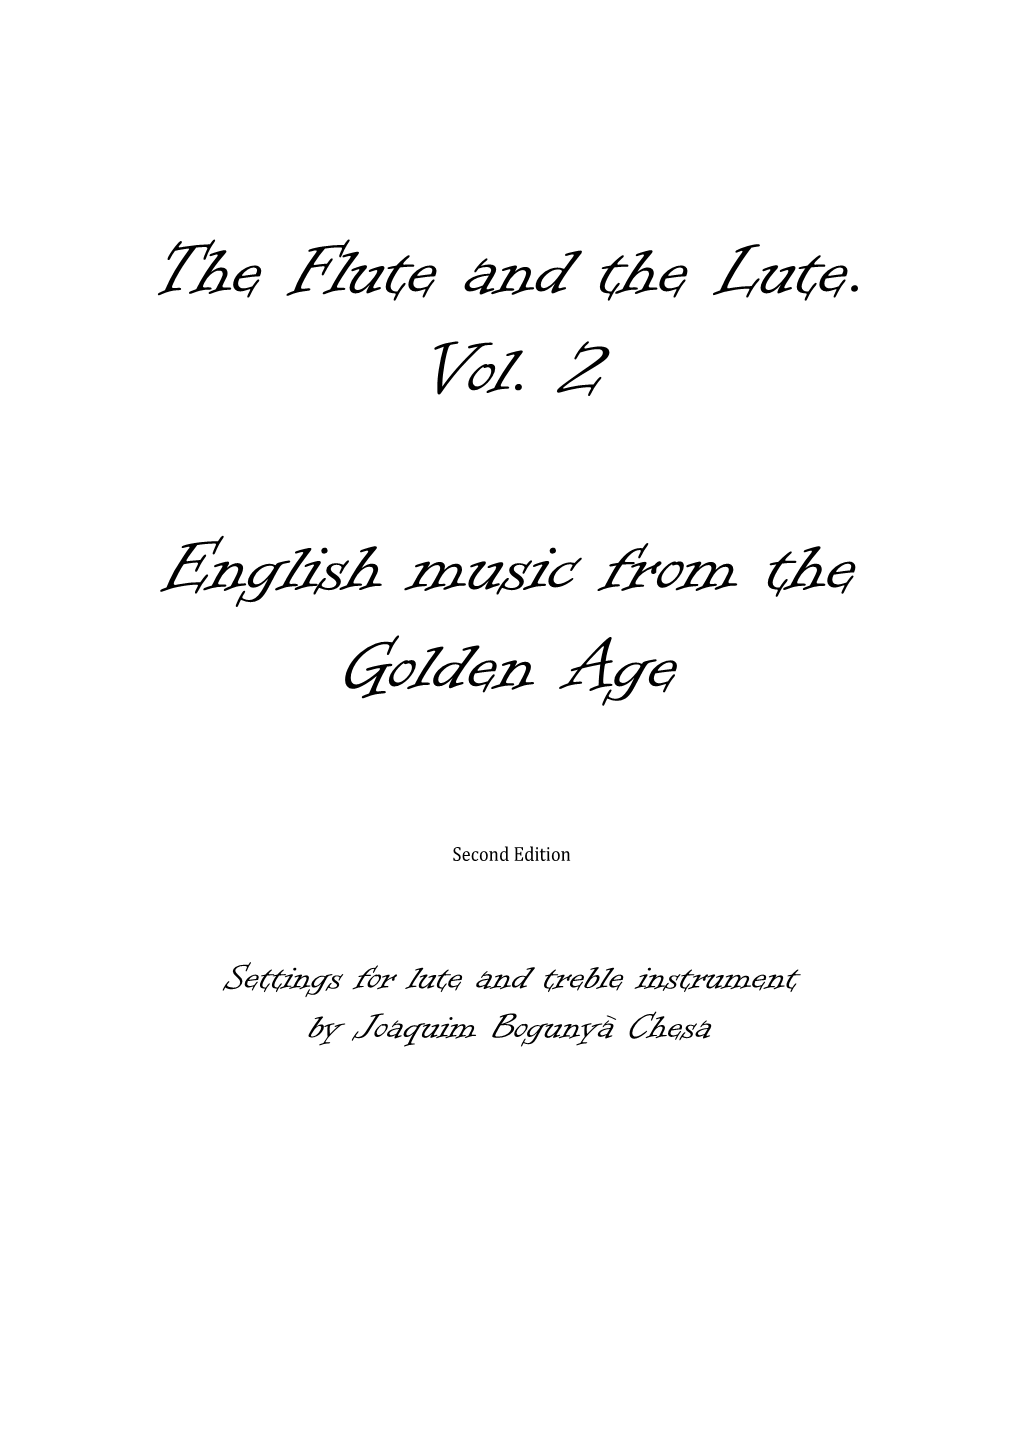 English Music from the Golden Age